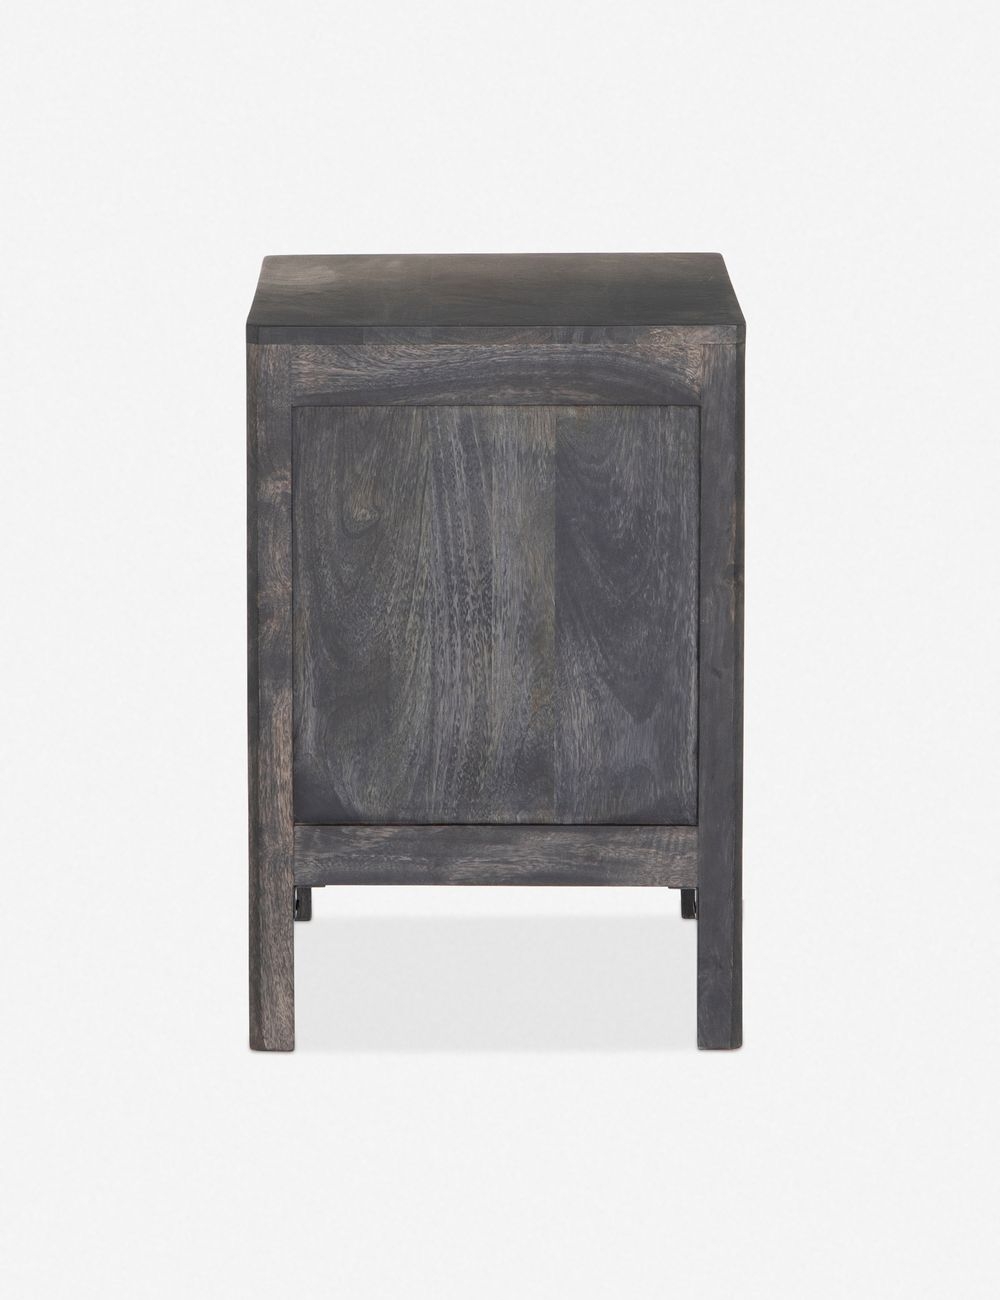 Hnnah Right Nightstand, Black Wash - Image 3